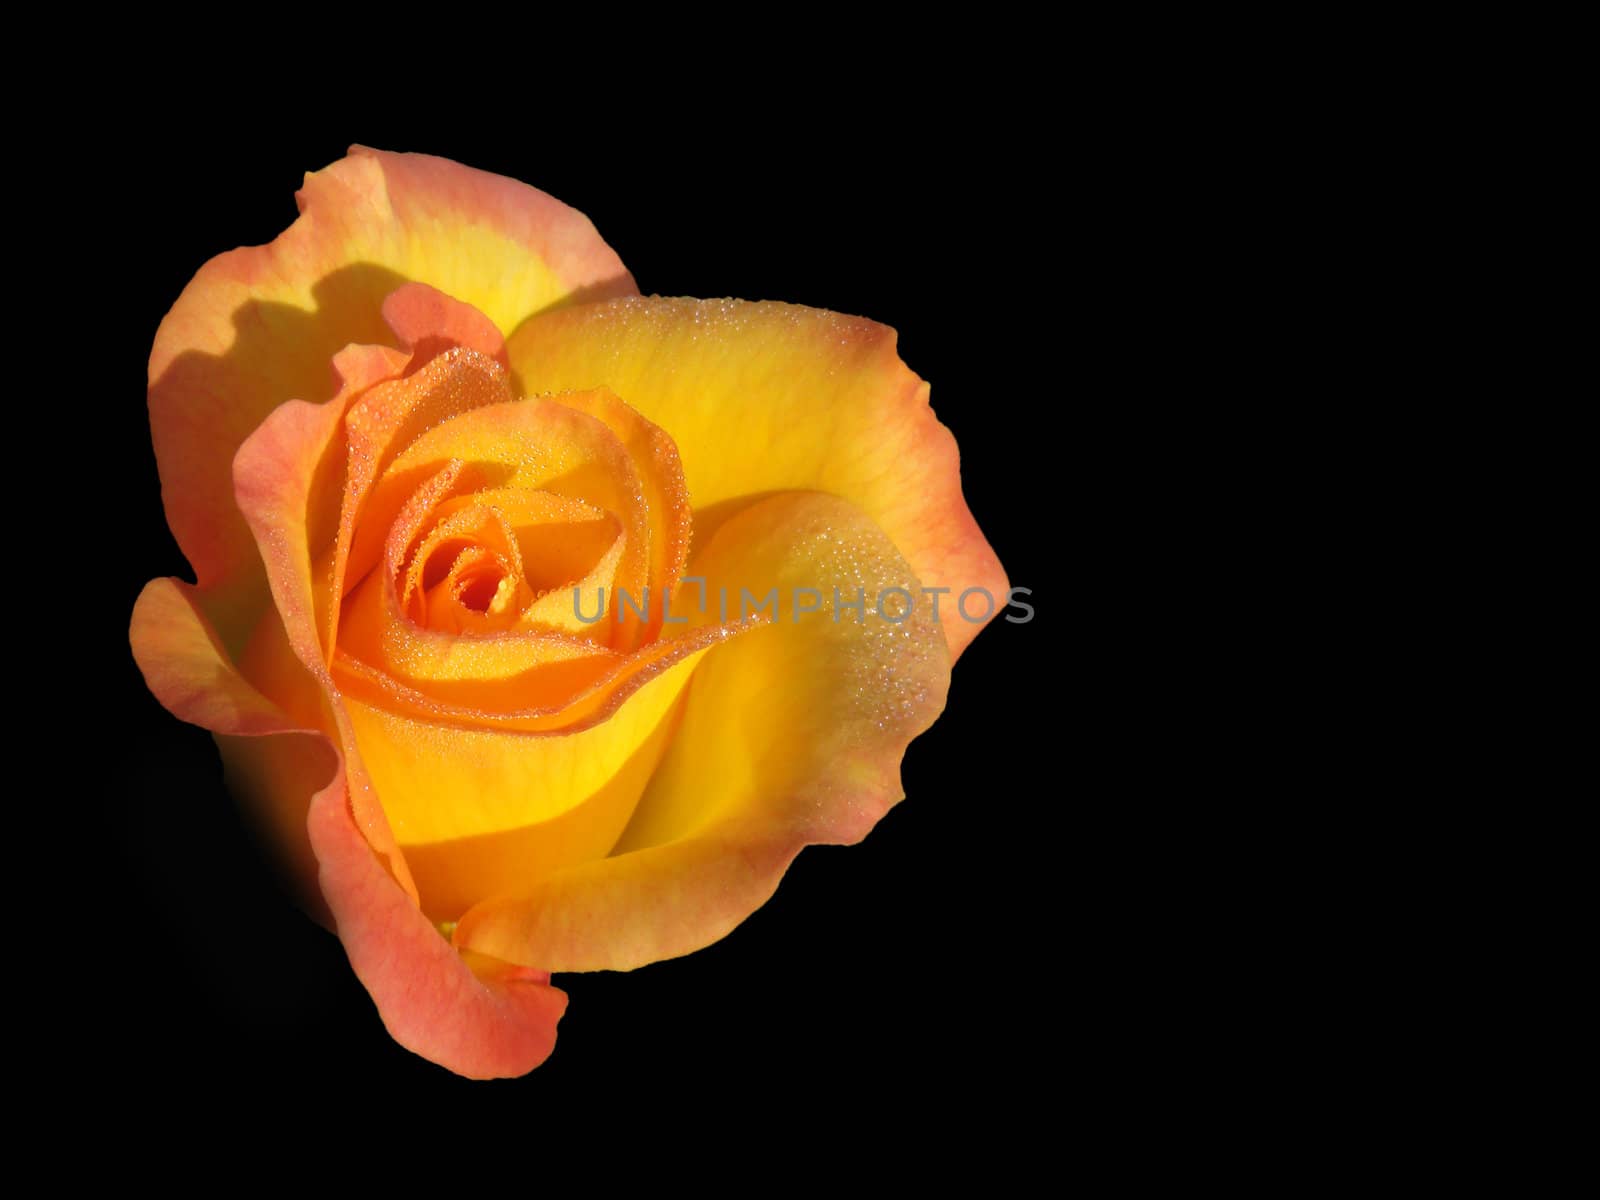 Rose on the black background